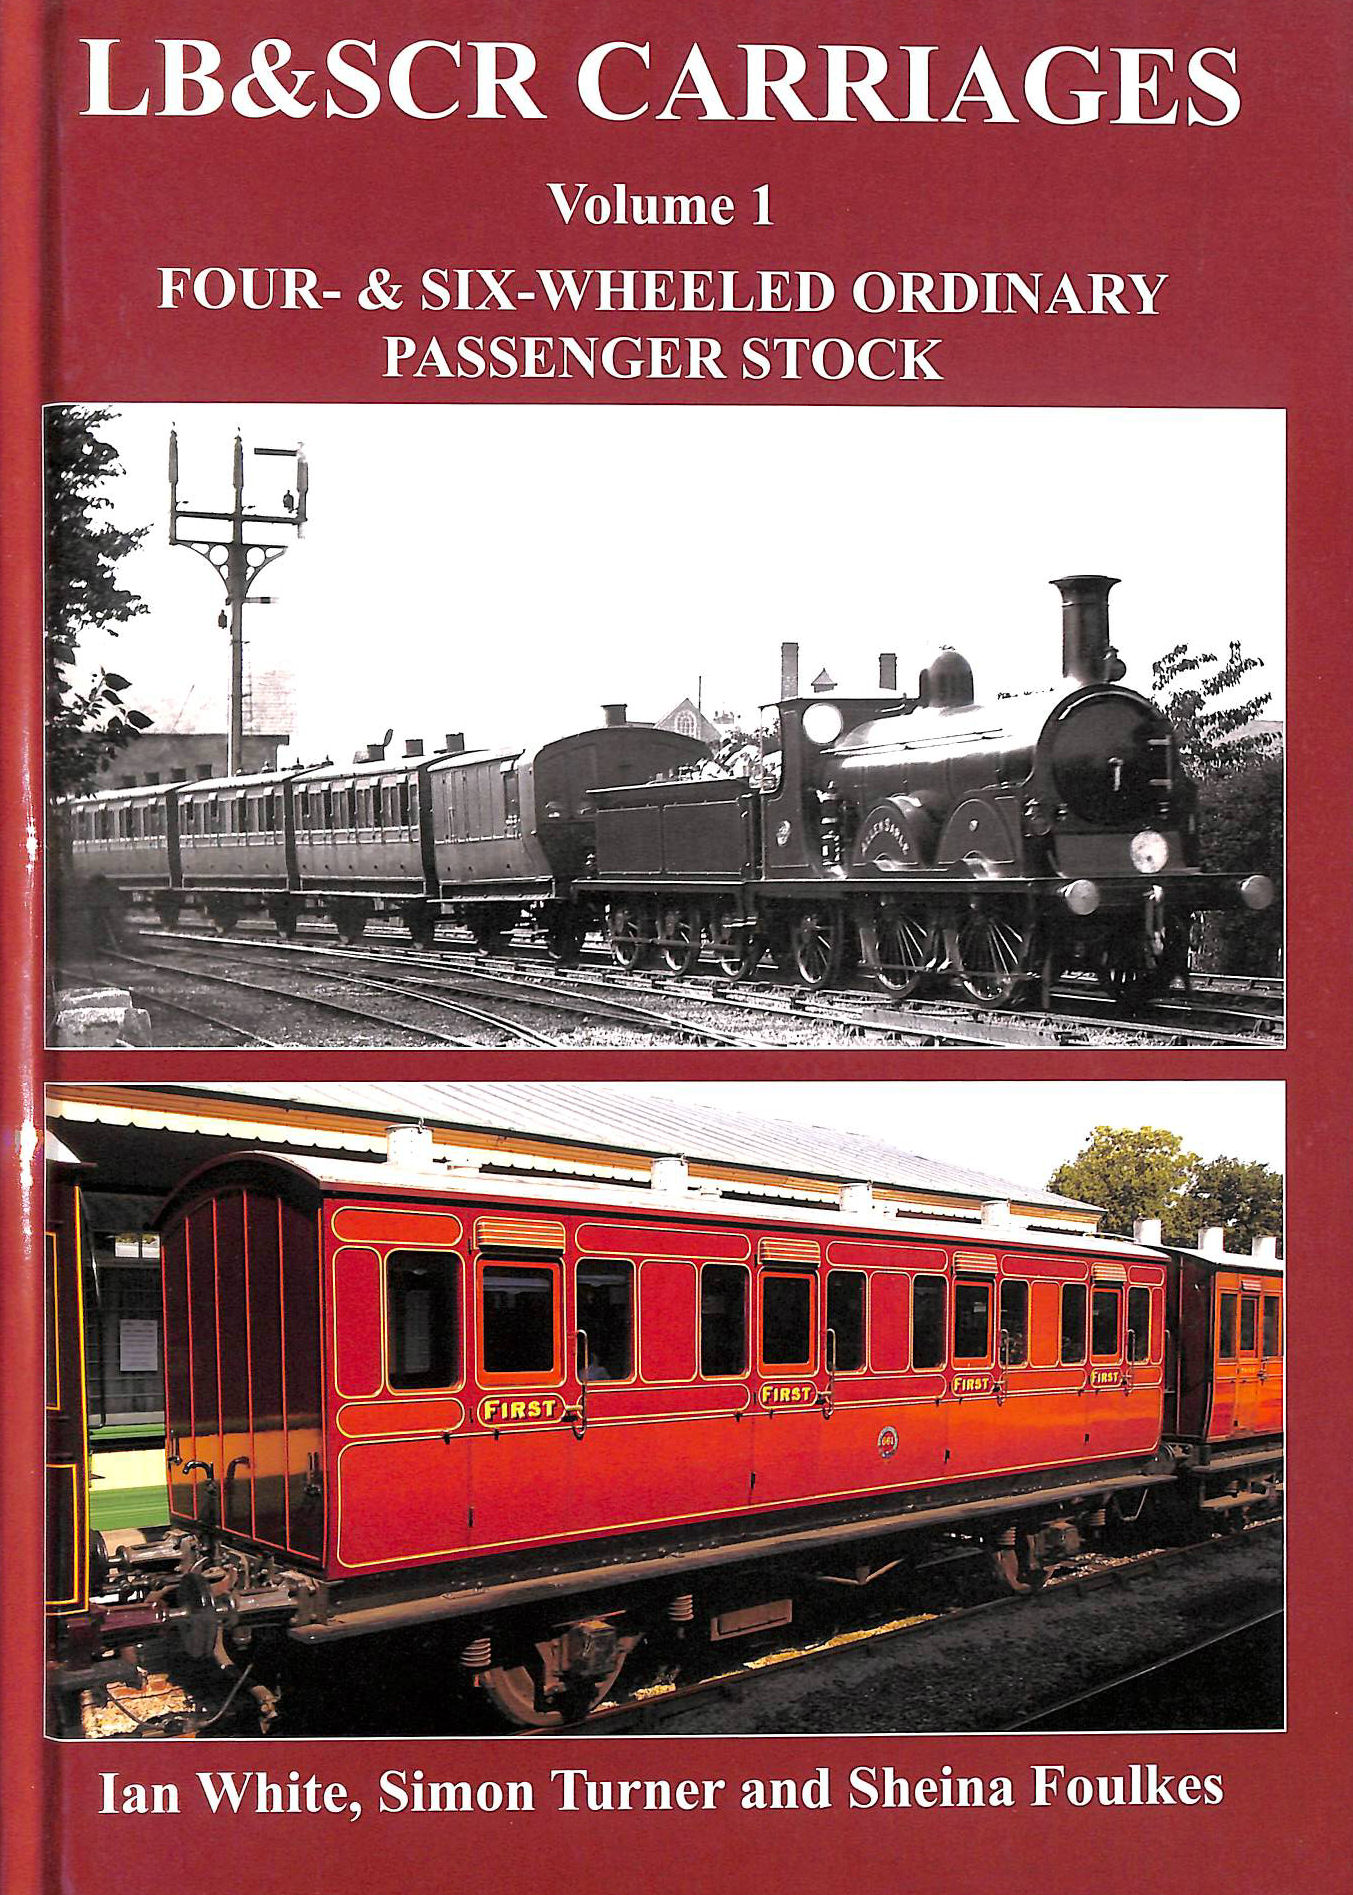  - LB&SCR Carriages: Volume 1: Four- and Six-Wheeled Ordinary Passenger Stock (LB&SCR Carriages: Four- and Six-Wheeled Ordinary Passenger Stock)